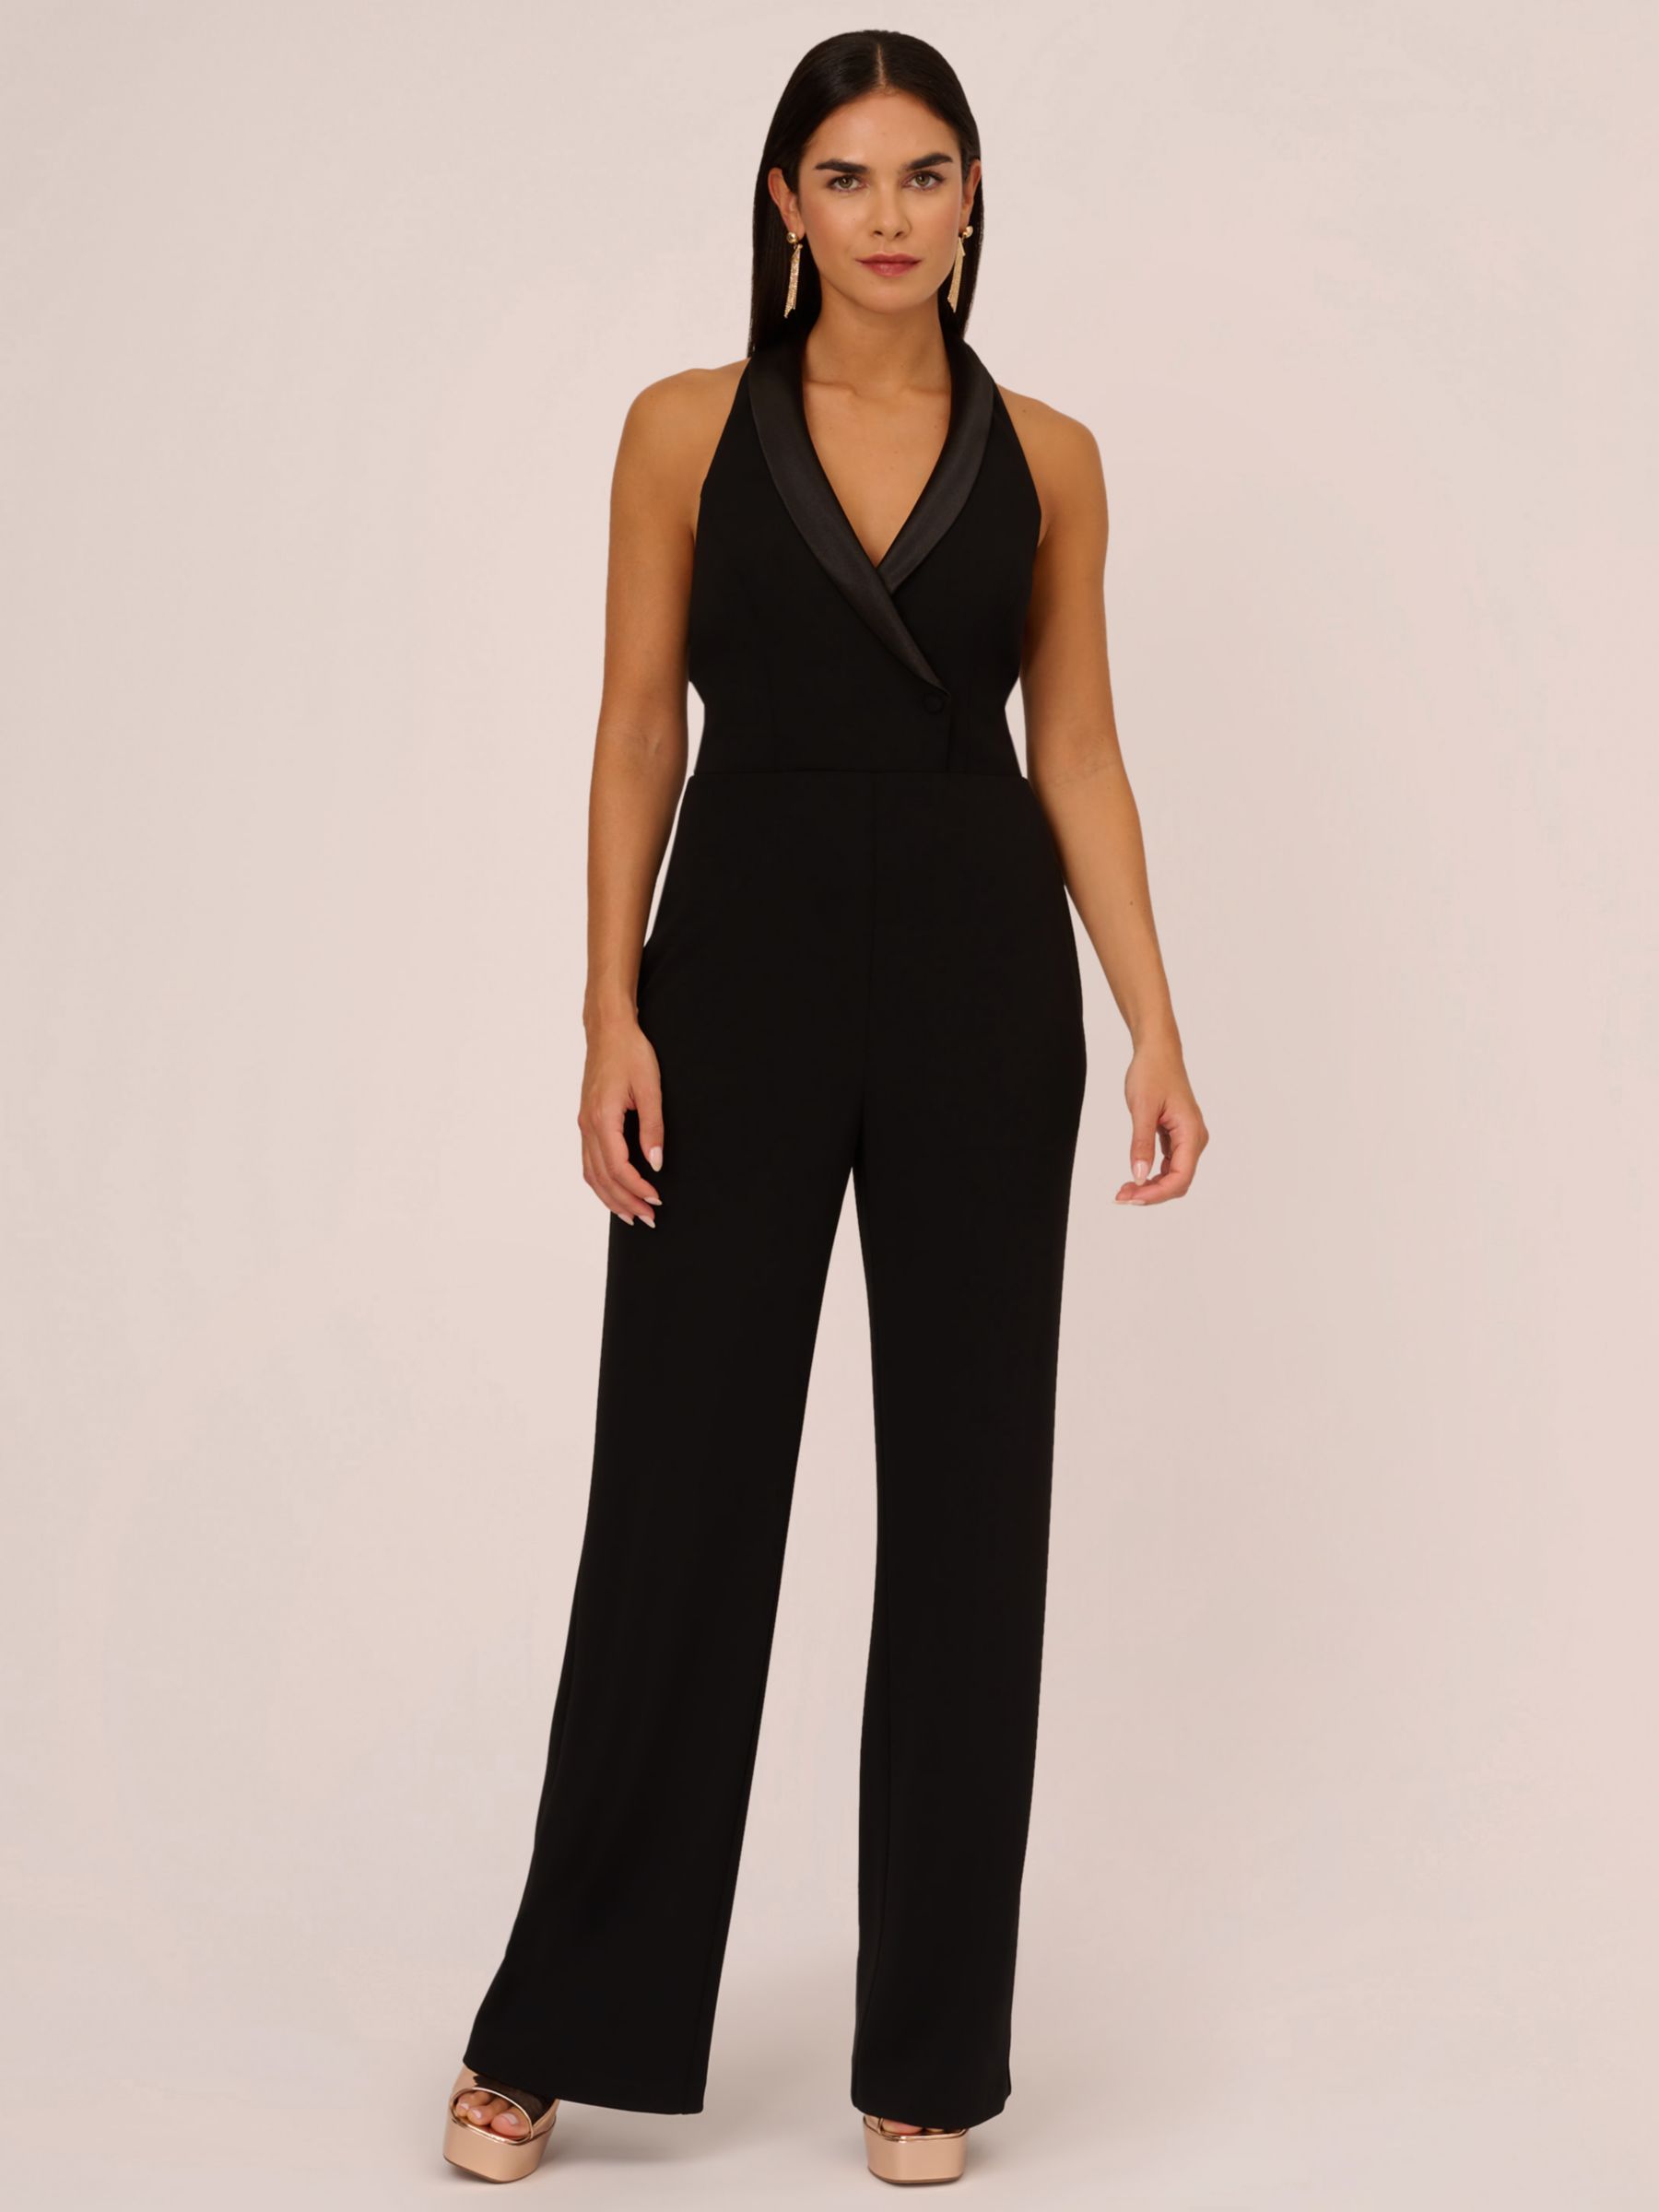 Aidan by Adrianna Papell Tuxedo Crepe Jumpsuit, Black at John Lewis ...